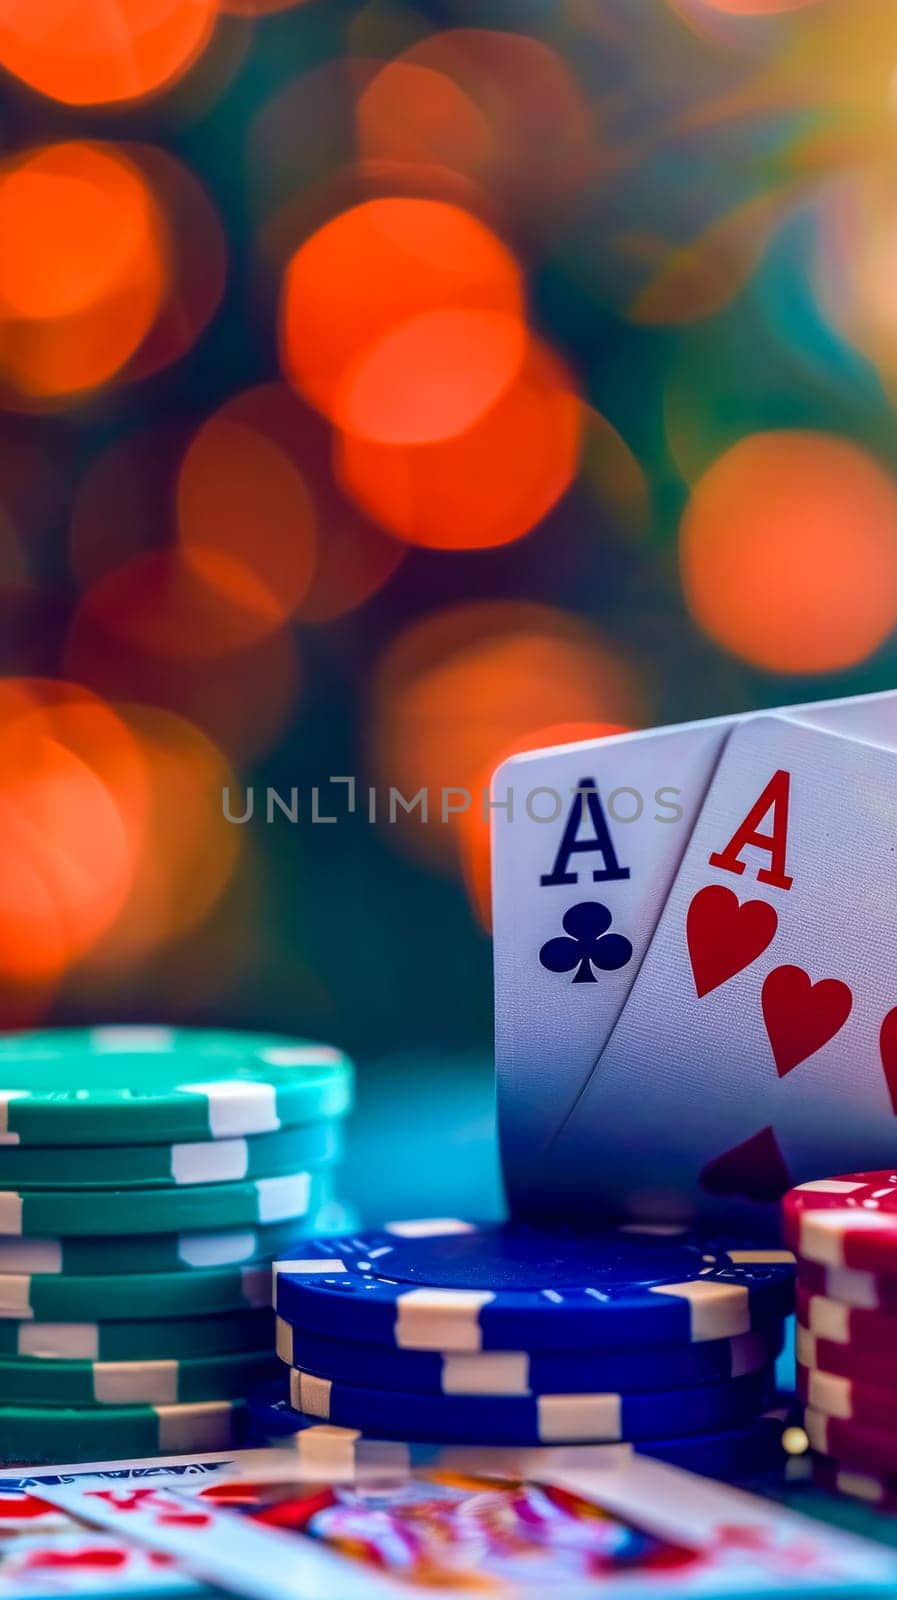 two aces, one of clubs and one of hearts, with a stack of colorful poker chips in the background, all set against a bokeh of warm lights creating a rich casino atmosphere by Edophoto